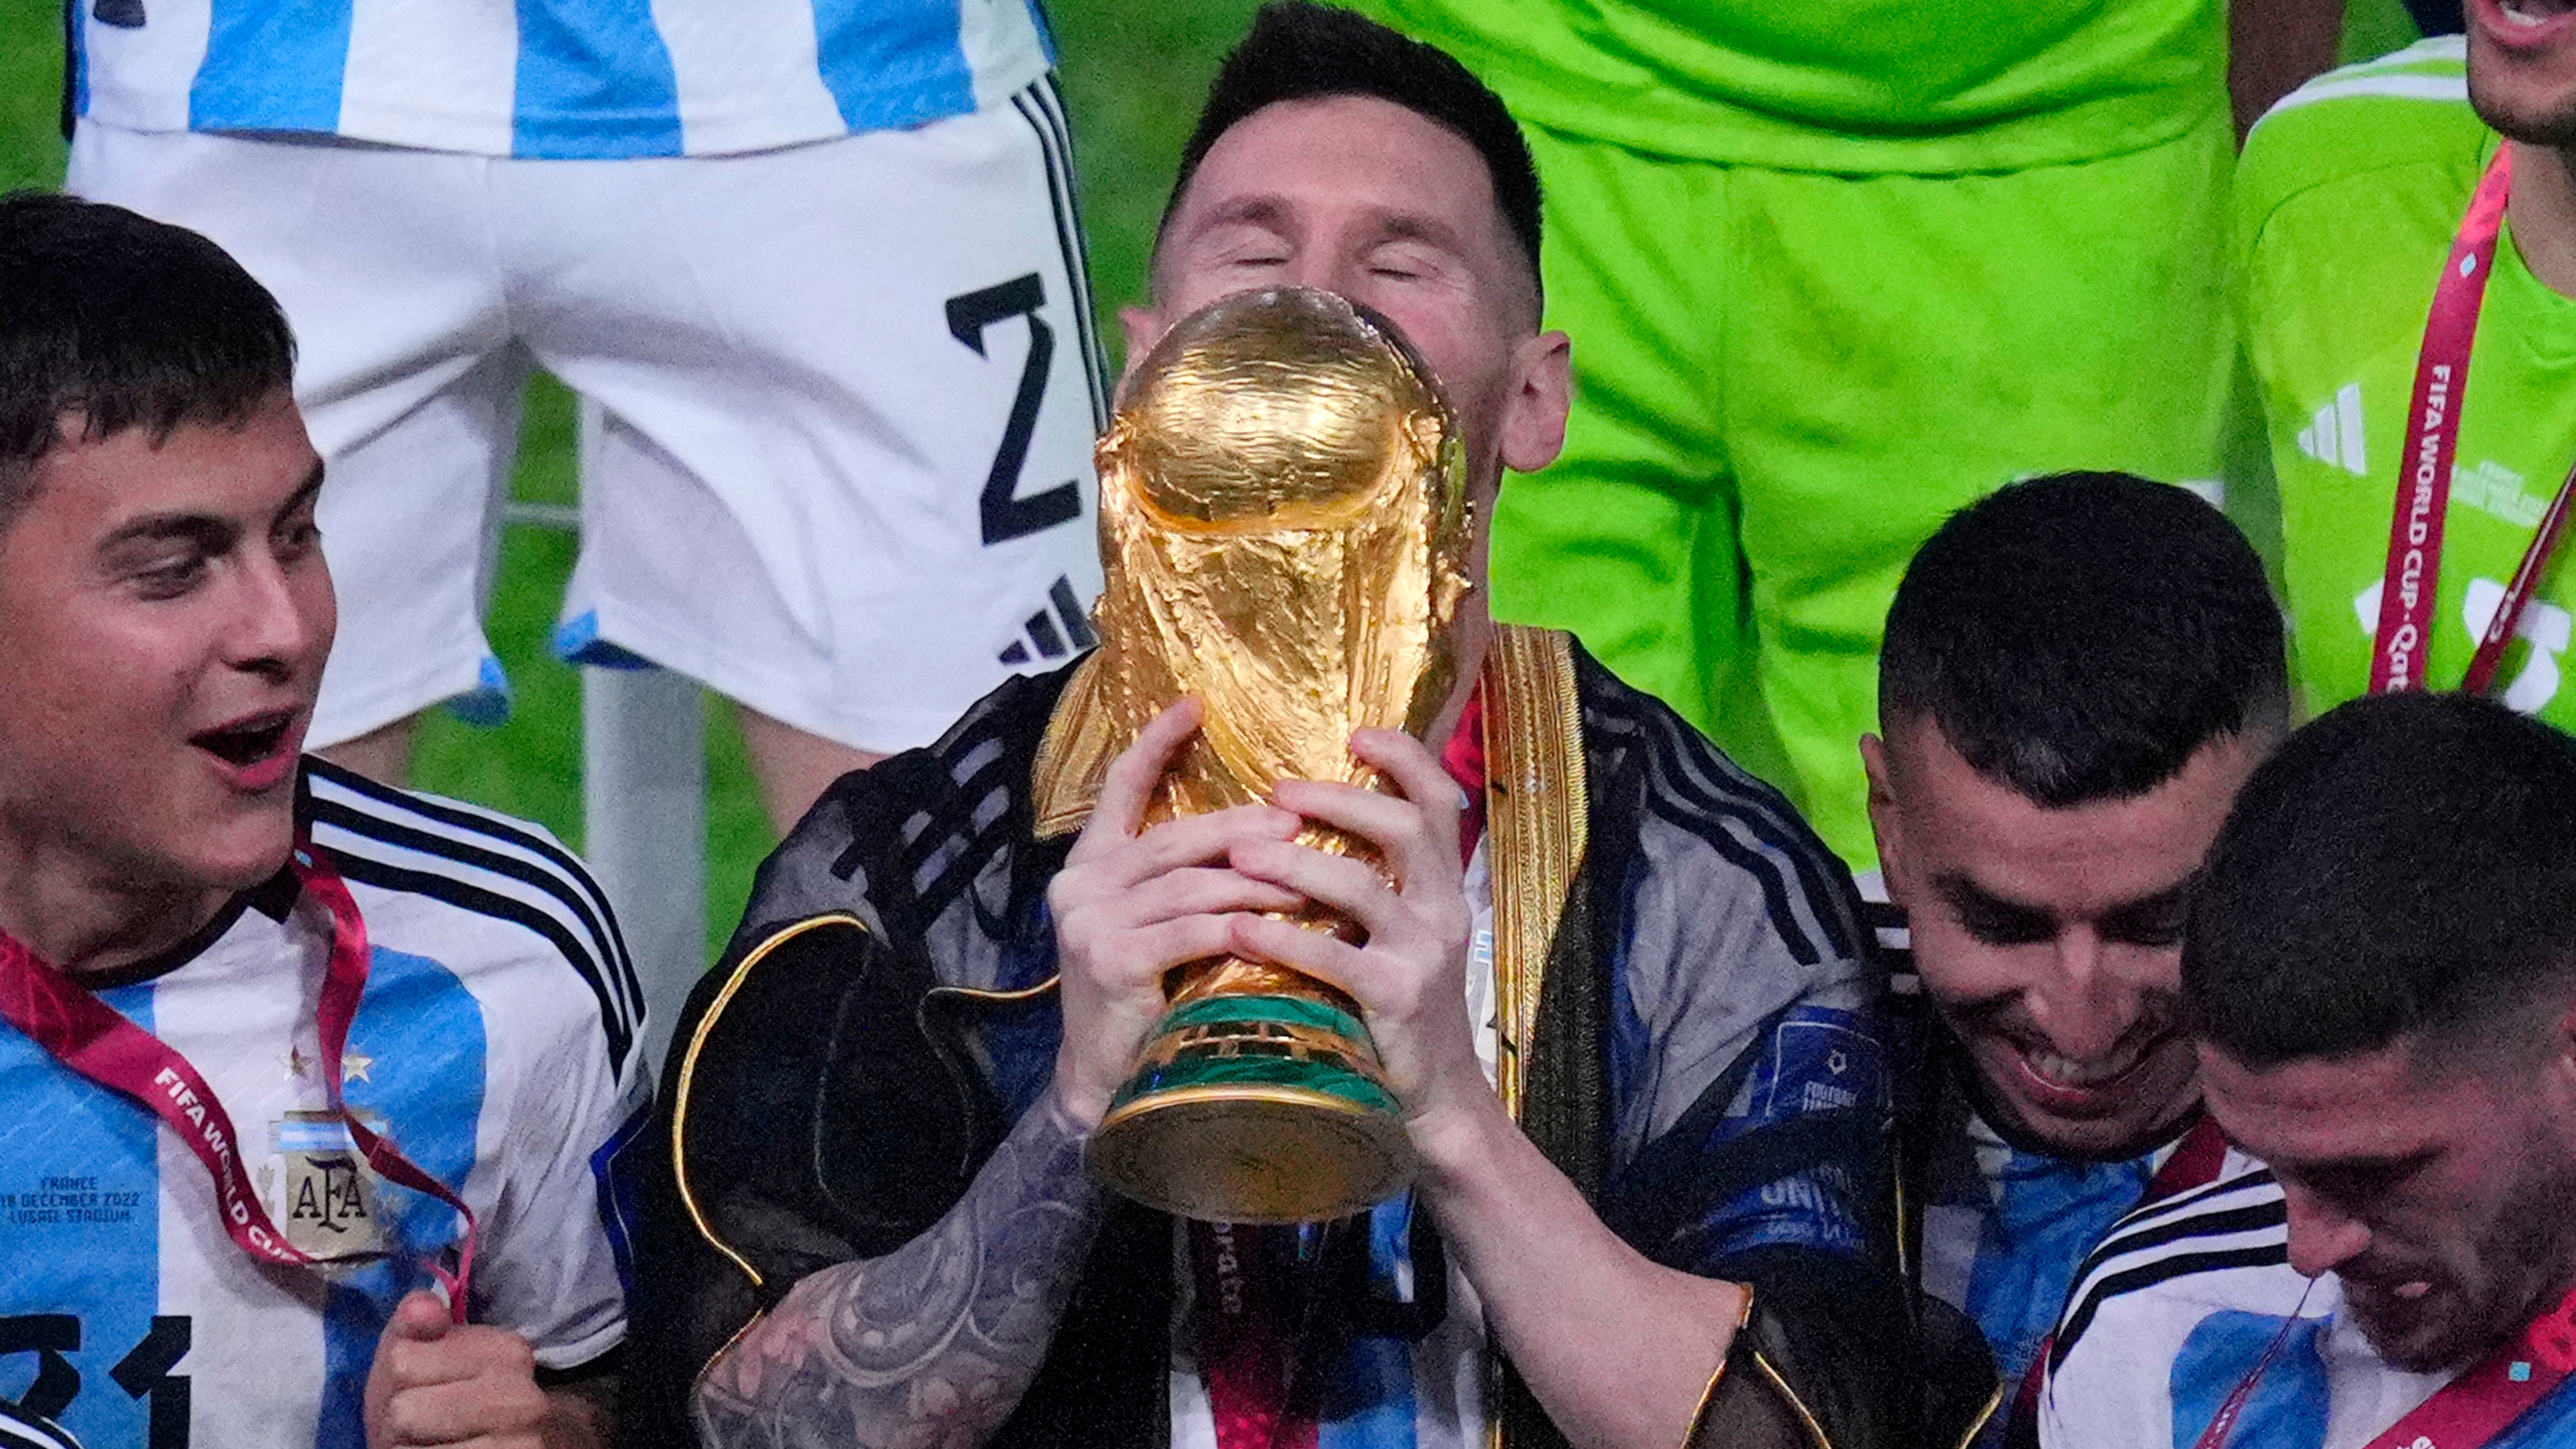 Lionel Messi kisses the World Cup he won with Argentina on Sunday, December 18, in Qatar after beating France on penalties (AP Photo/Hassan Ammar)